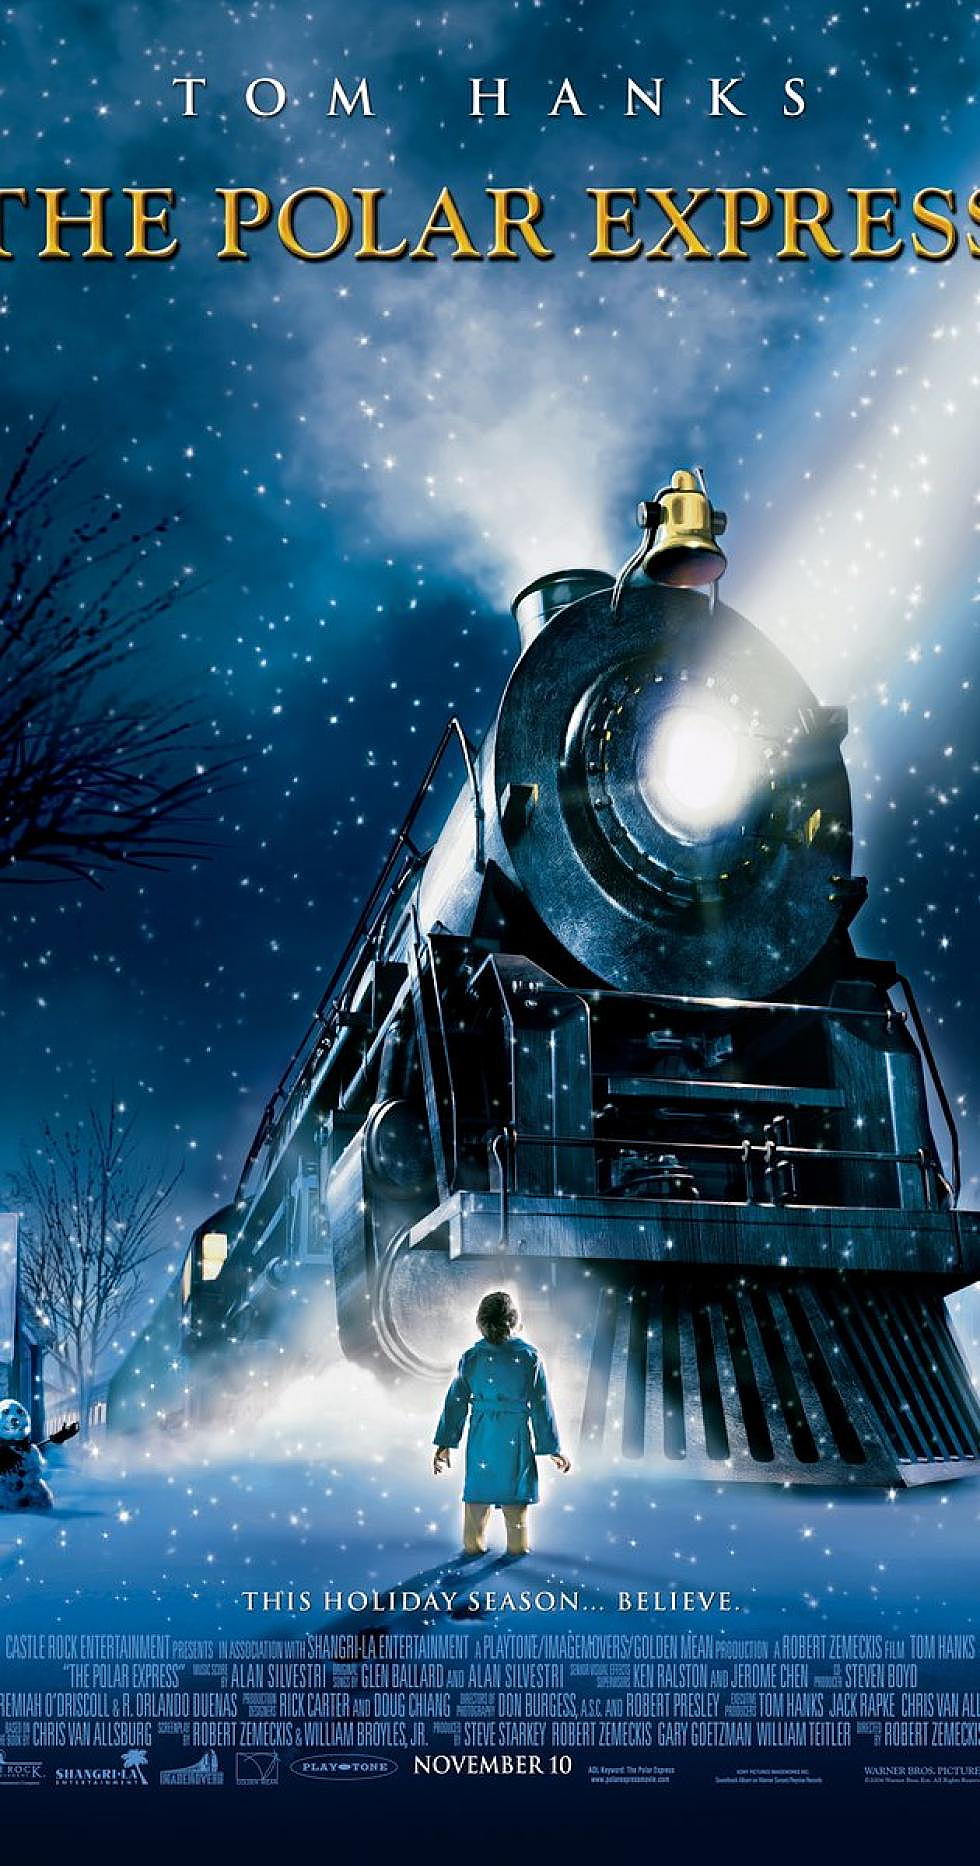 ‘The Polar Express’ Movie Screening Coming Up at Mae Simmons Center